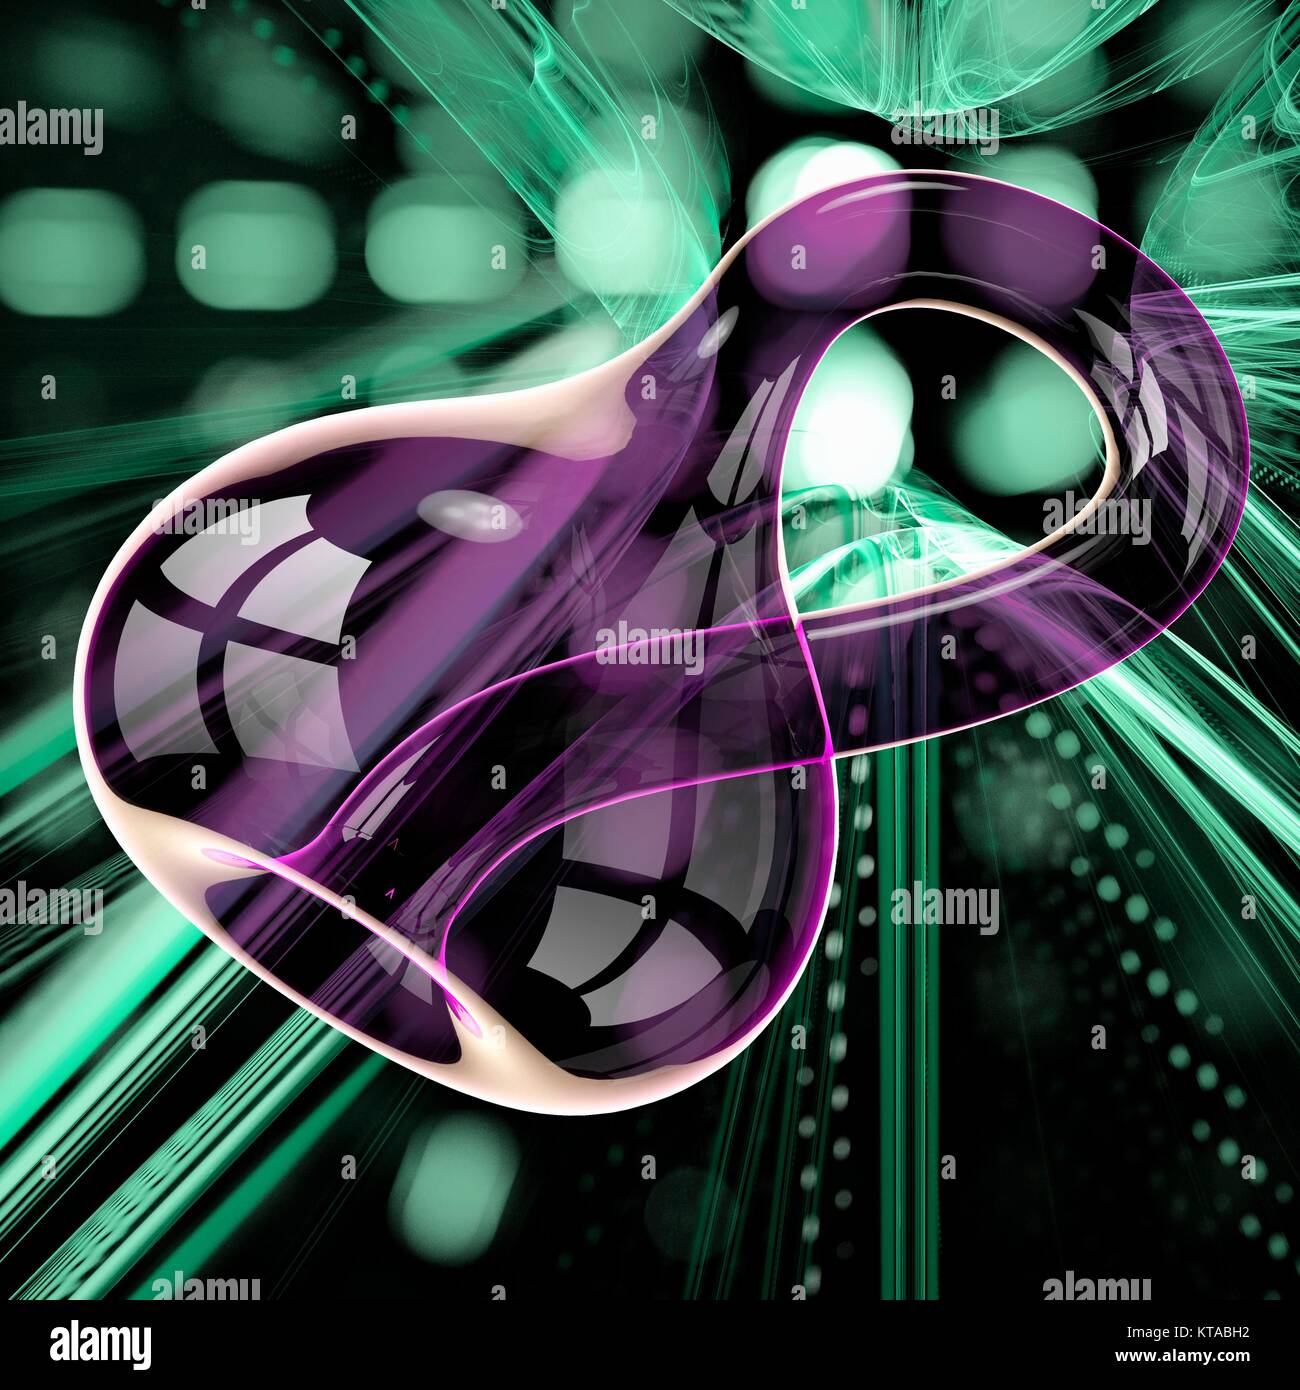 Klein bottle, computer illustration. A Klein bottle is a closed non-orientable surface with only one side, for which there is no distinction between the inside and outside of the surface. Unlike the Mobius strip, the Klein bottle is a closed manifold, meaning it is a compact manifold without boundary. Stock Photo